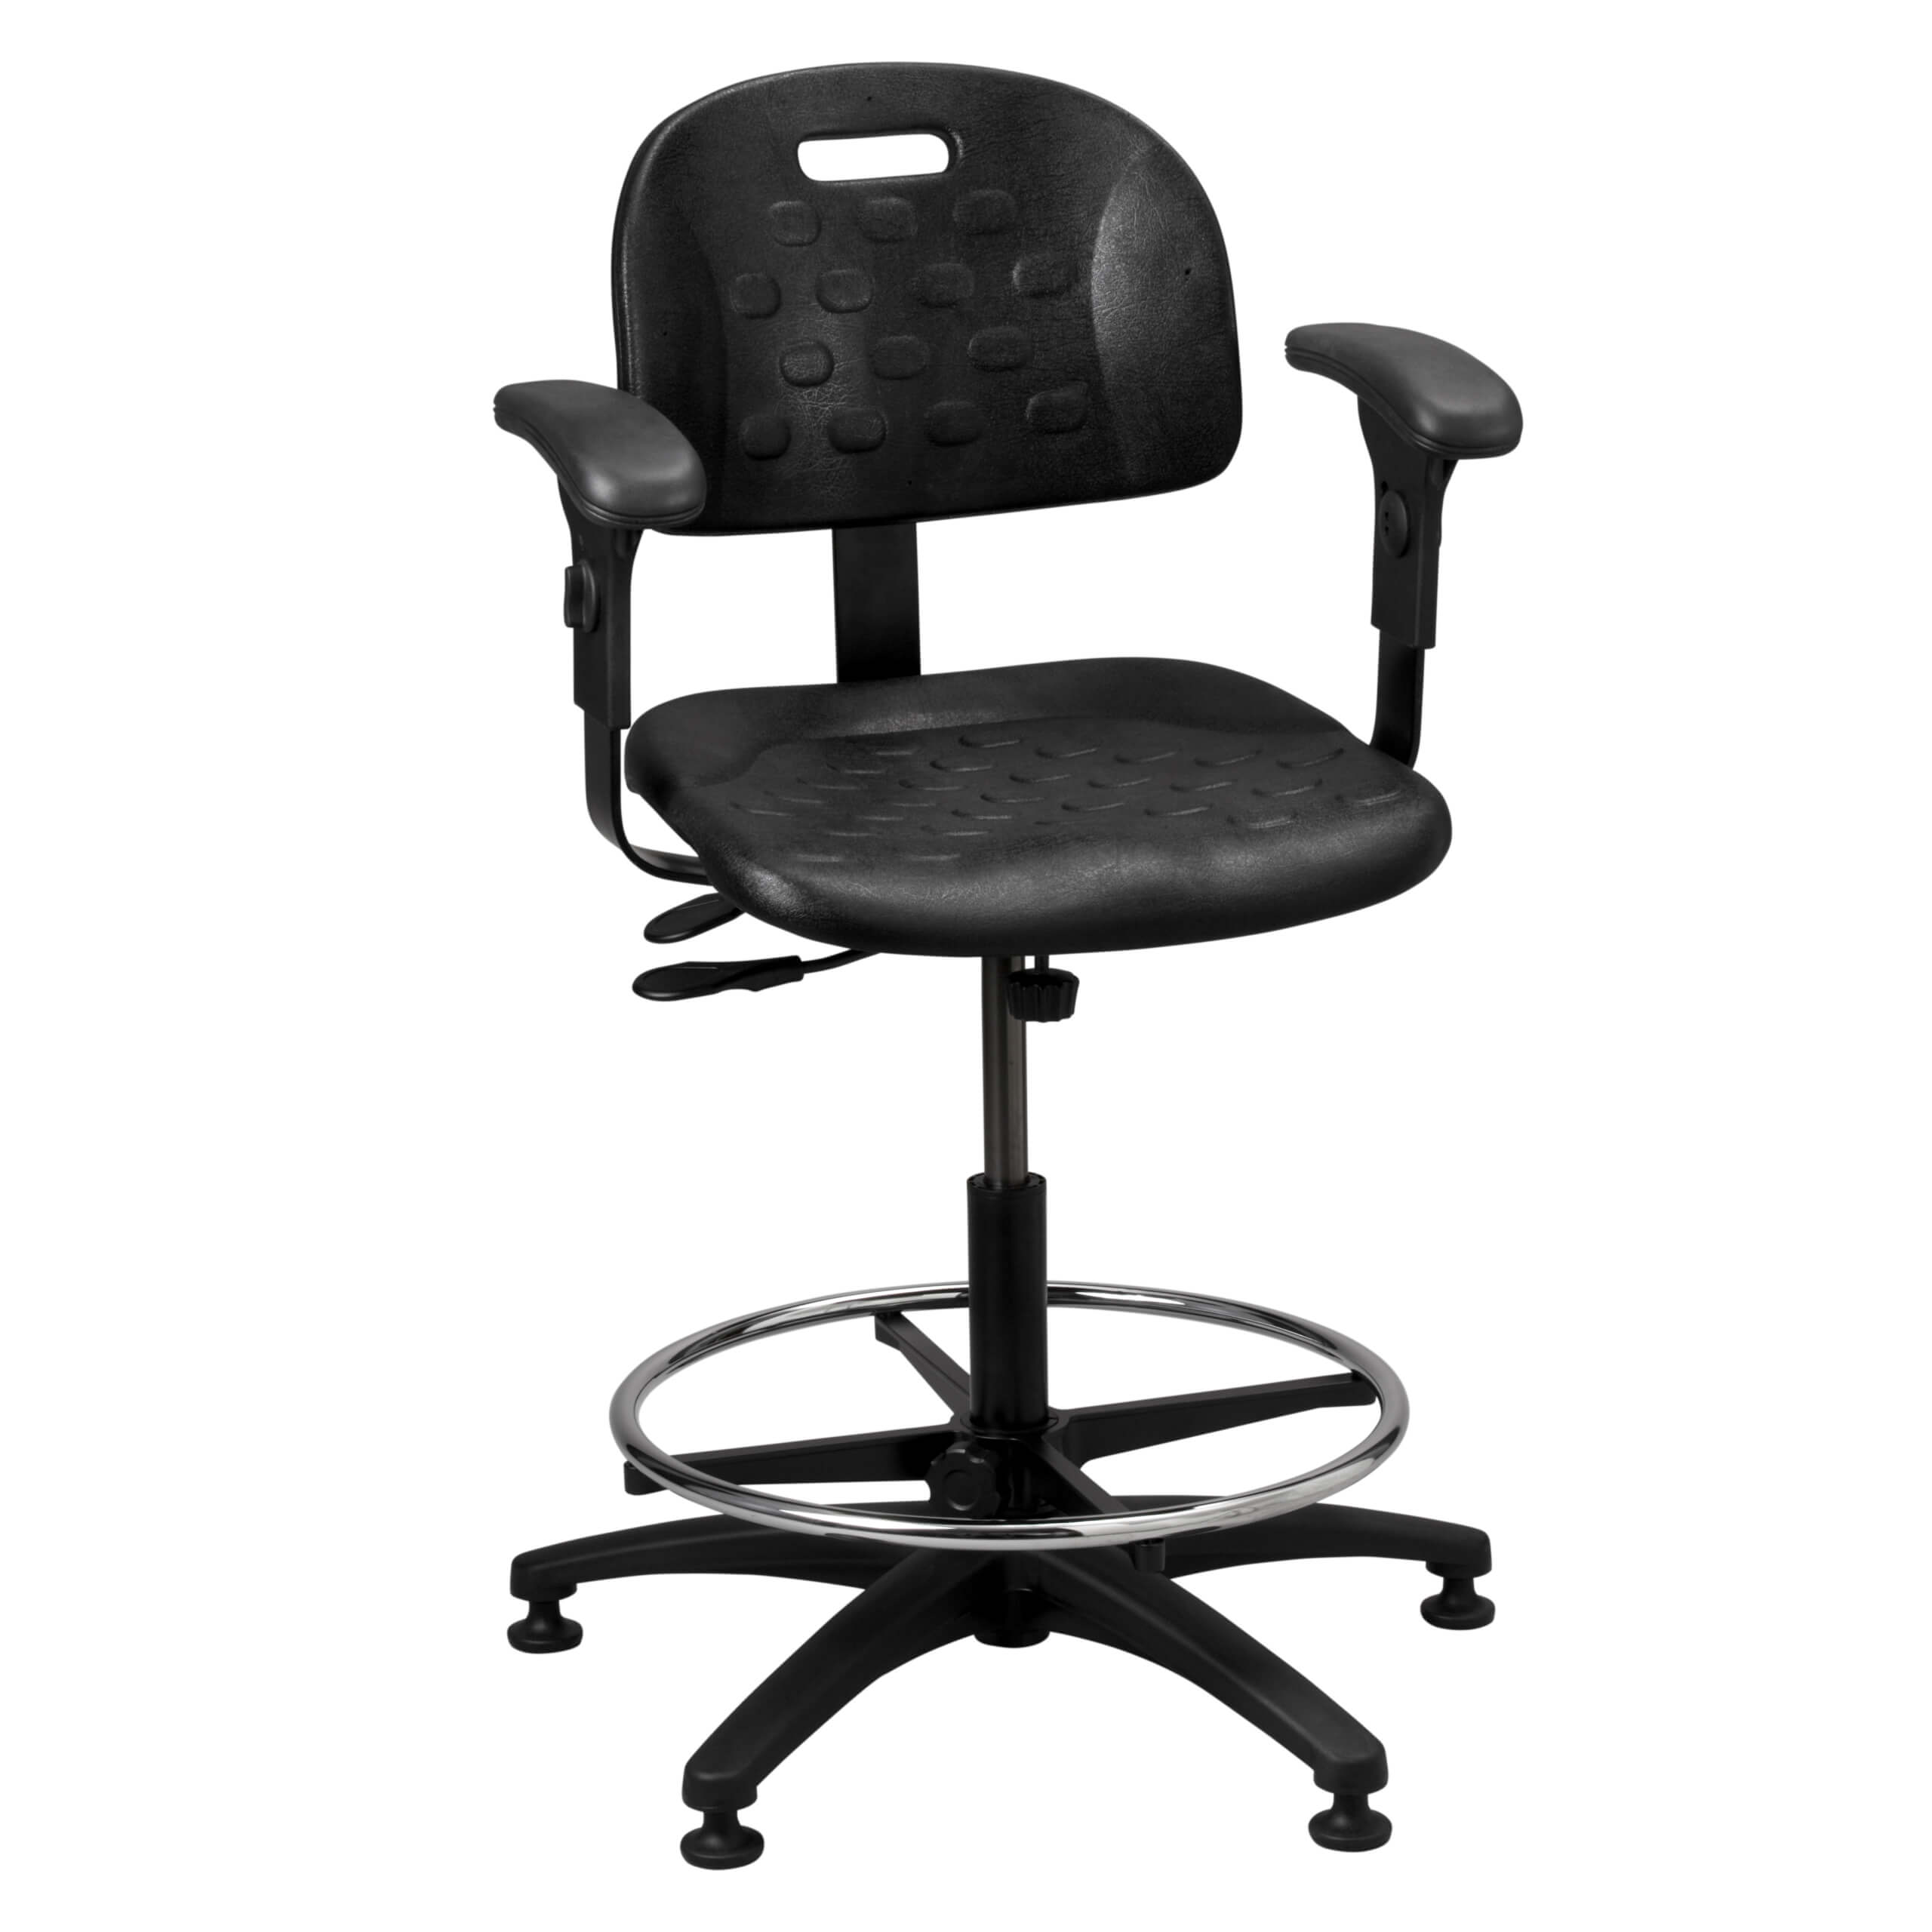 PT-3-EAA-C Industrial Medical Stool with Ergonomic armrests and casters